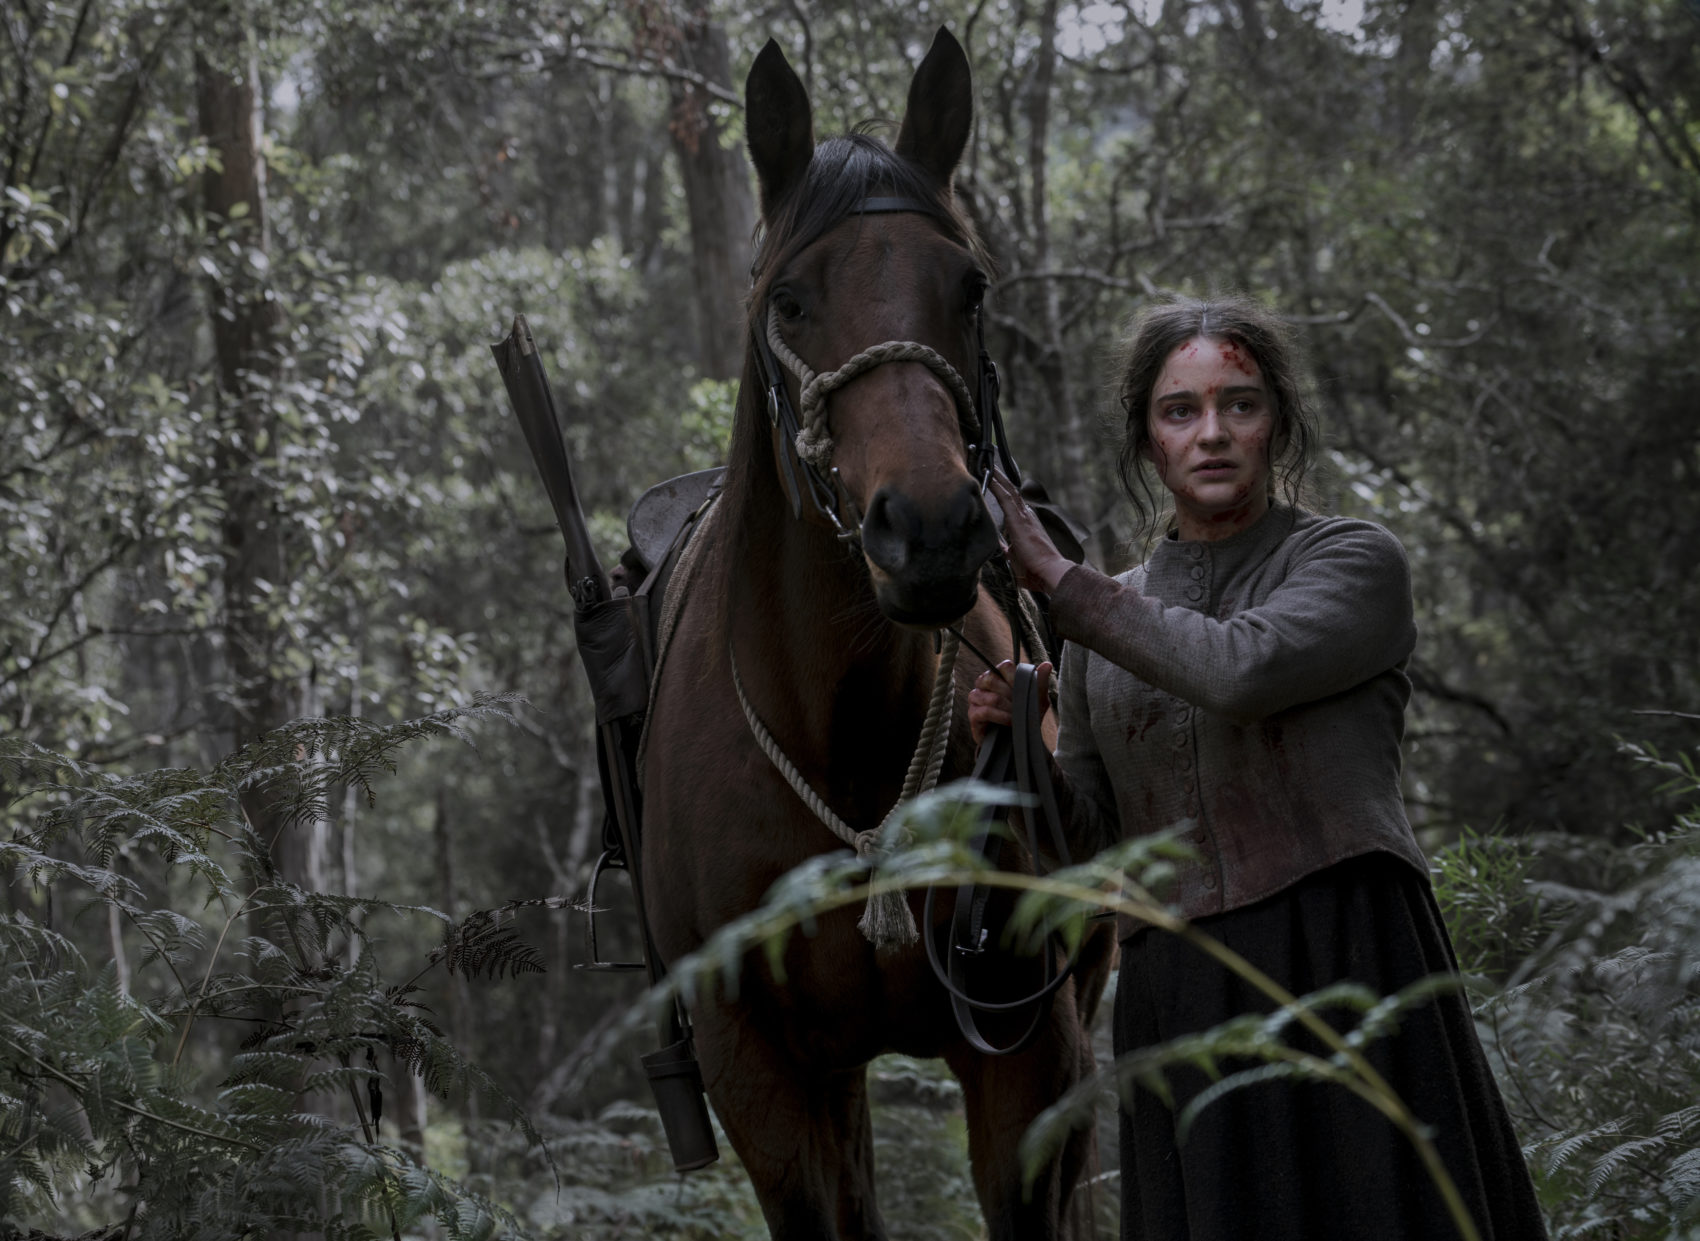 Aisling Franciosi stars as Clare in Jennifer Kent's "The Nightingale." (Courtesy IFC Films)